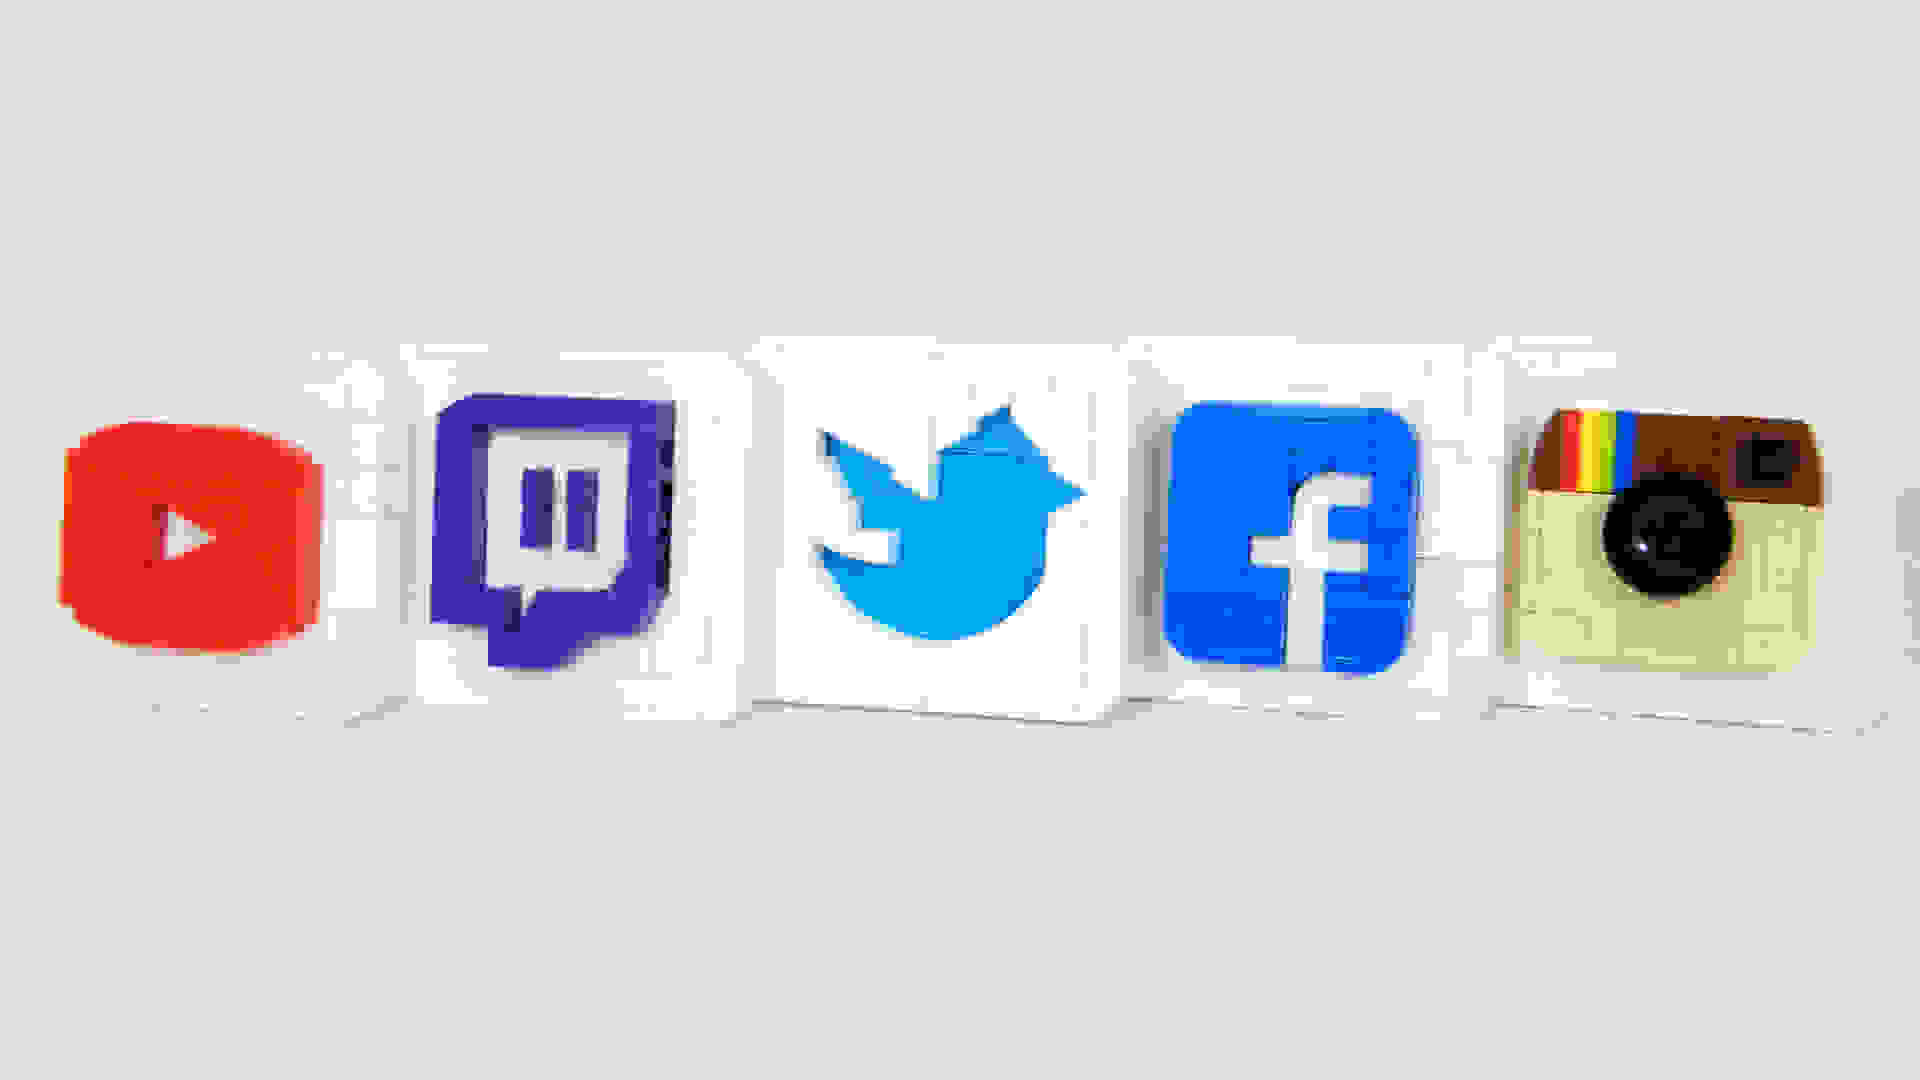 Social media icons. Image Courtesy: Jason Howie, Licensed under the Creative Commons Attribution 2.0 Generic